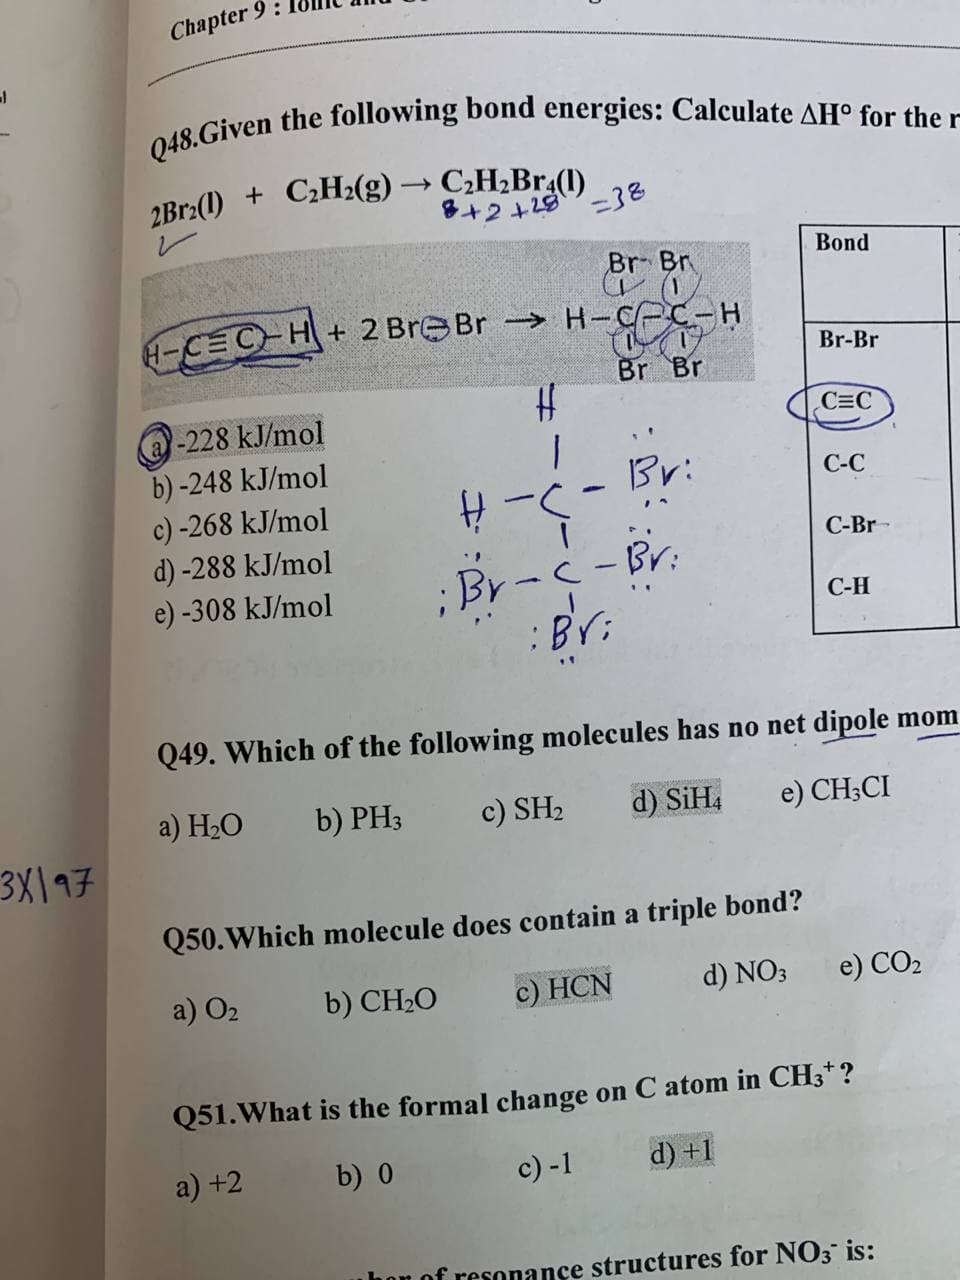 -
Chapter 9:
Q48.Given the following bond energies: Calculate AH° for the r
2Br2(1) + C₂H2(g) → C₂H₂Br4(1)
8+2+28
=38
Br Br
Bond
-CEC-H
+2 Br Br→→→→H-CPC-H
CO
Br Br
Br-Br
@-228 kJ/mol
#
C=C
b)-248 kJ/mol
1
Br:
C-C
c) -268 kJ/mol
H-C
d) -288 kJ/mol
C-Br
e) -308 kJ/mol
;Br-c-Br:
: Bri
C-H
Q49. Which of the following molecules has no net dipole mom
a) H₂O
c) SH₂
b) PH3
d) SiH4 e) CH3CI
Q50. Which molecule does contain a triple bond?
a) 0₂
b) CH₂O
c) HCN
d) NO3
e) CO₂
Q51. What is the formal change on C atom in CH3*?
a) +2
b) 0
c) -1
d) +1
hor of resonance structures for NO3 is:
3X197